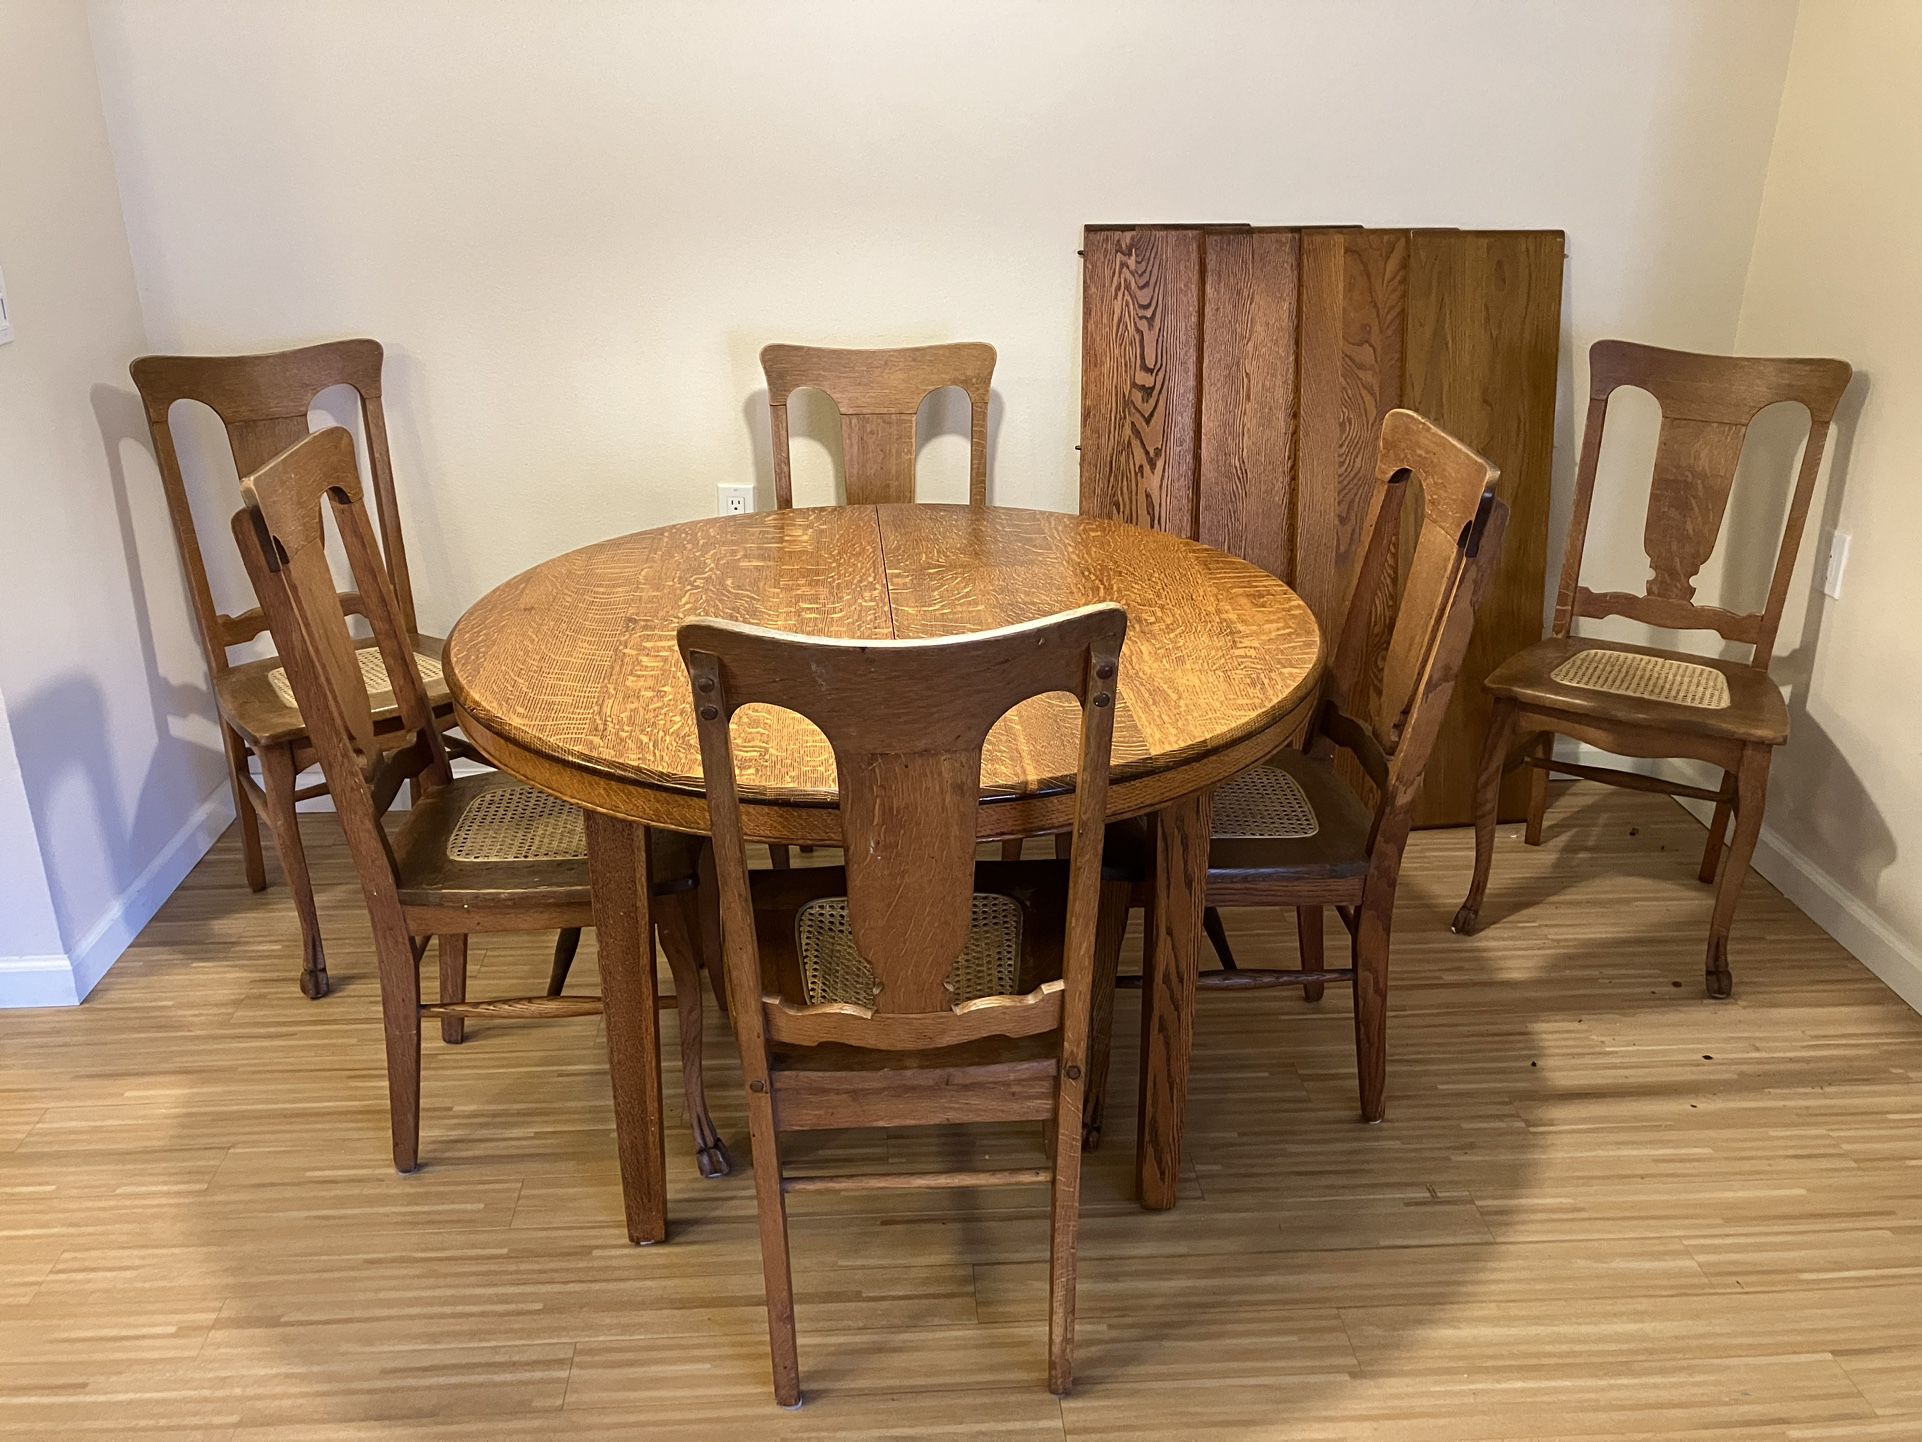 GORGEOUS Vintage Golden Oak Dining Table with 6 Caned Chairs!